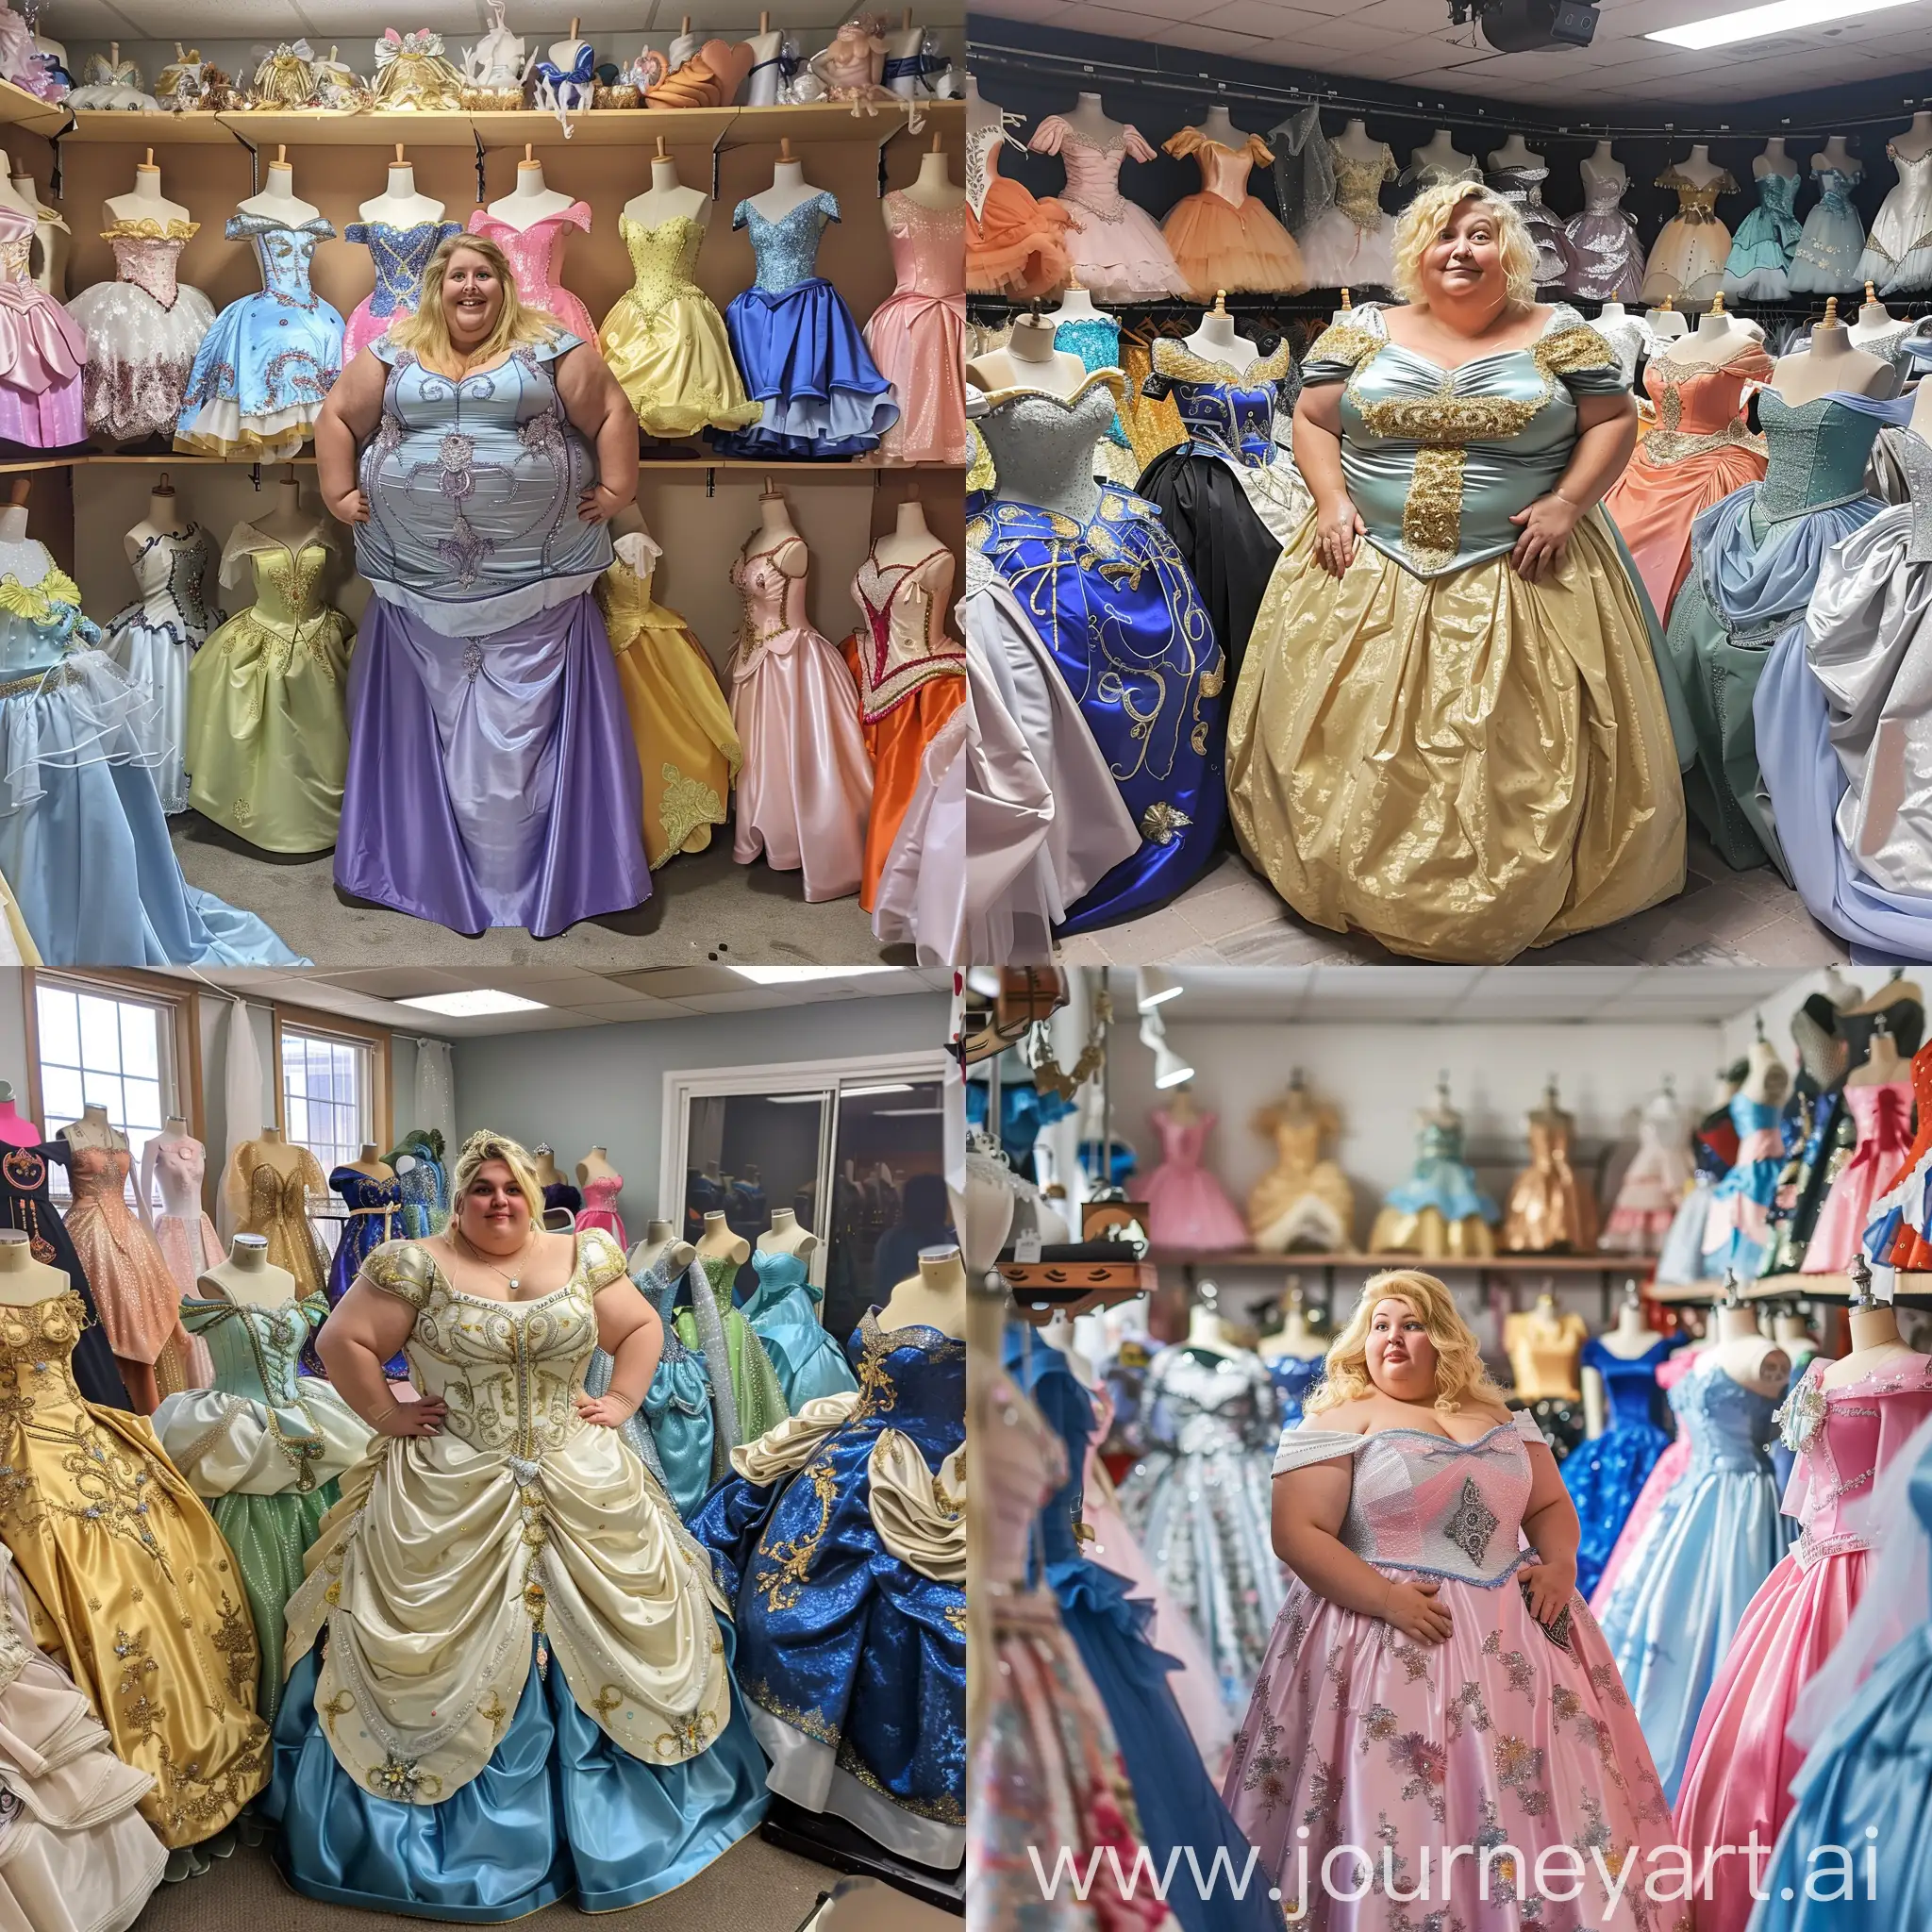 Deluxe-Fantasy-Princess-Costume-Studio-Fat-Blonde-Woman-Surrounded-by-Assorted-Dresses